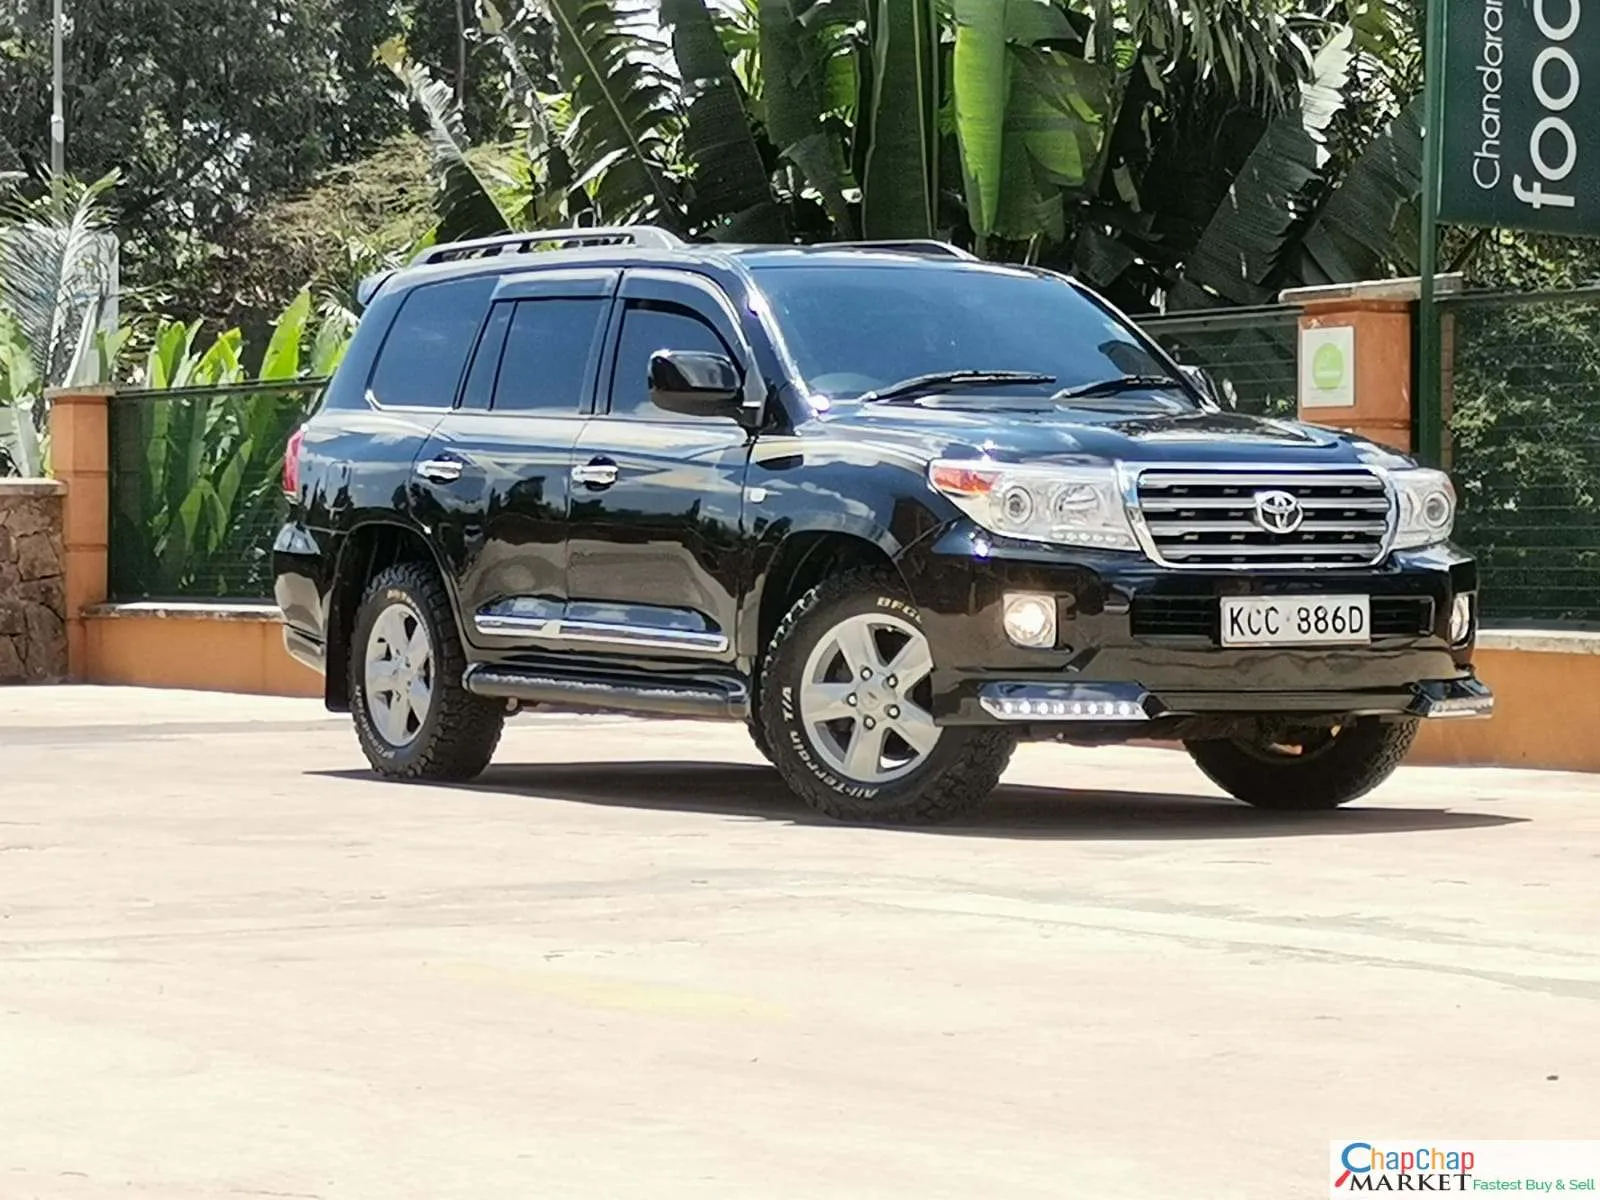 Toyota Land cruiser V8 200 series 3.3M ONLY TRADE IN OK EXCLUSIVE v8 for Sale in Kenya hire purchase installments